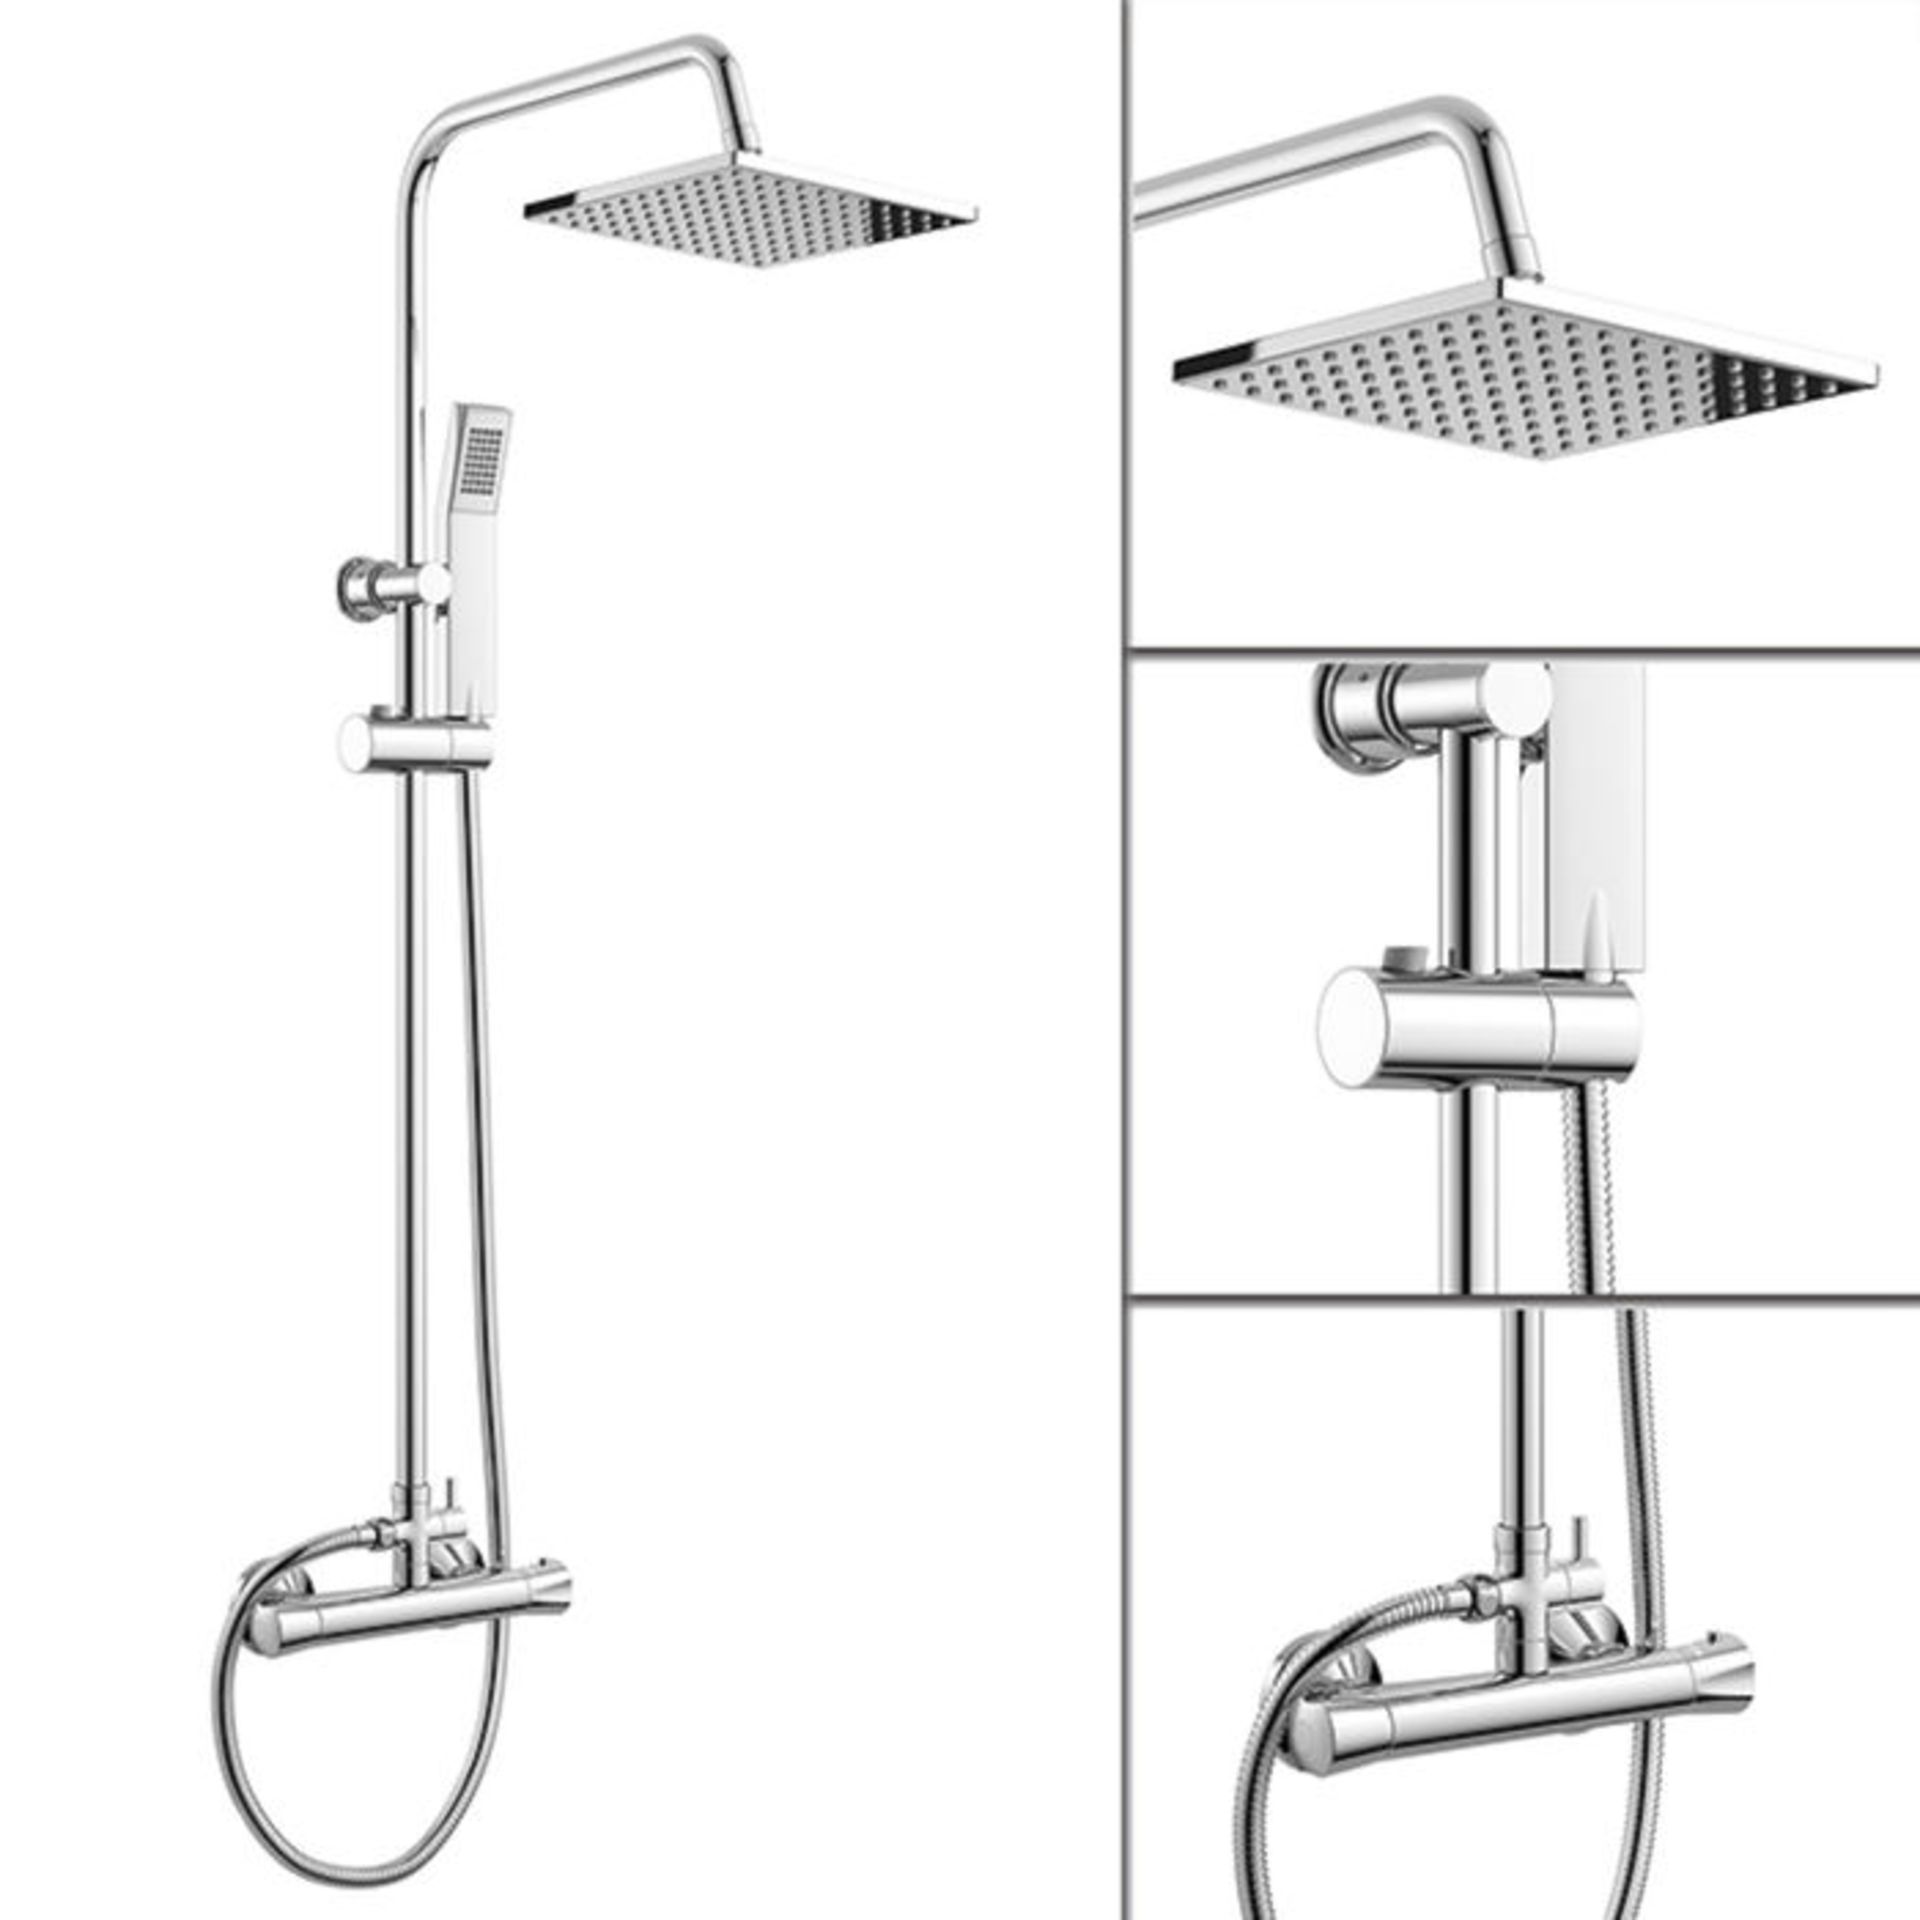 (CT155) Square Exposed Thermostatic Shower Kit & Head. Curved features and contemporaryValves - Image 2 of 2